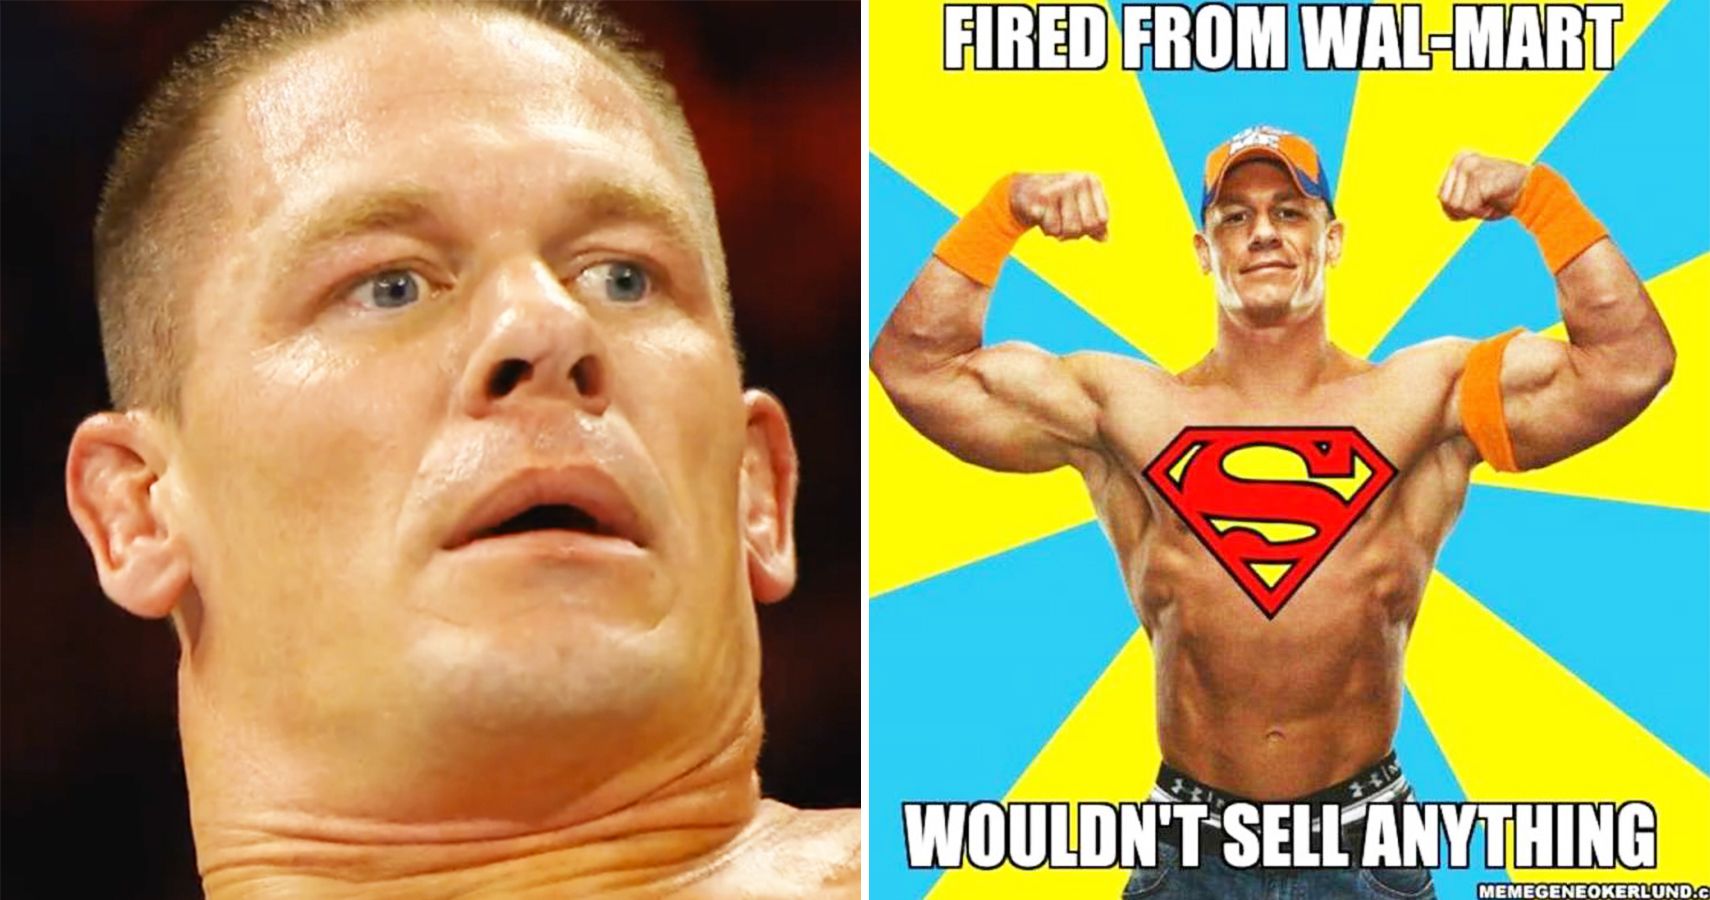 Top 15 Savage AF Memes About John Cena | TheSportster